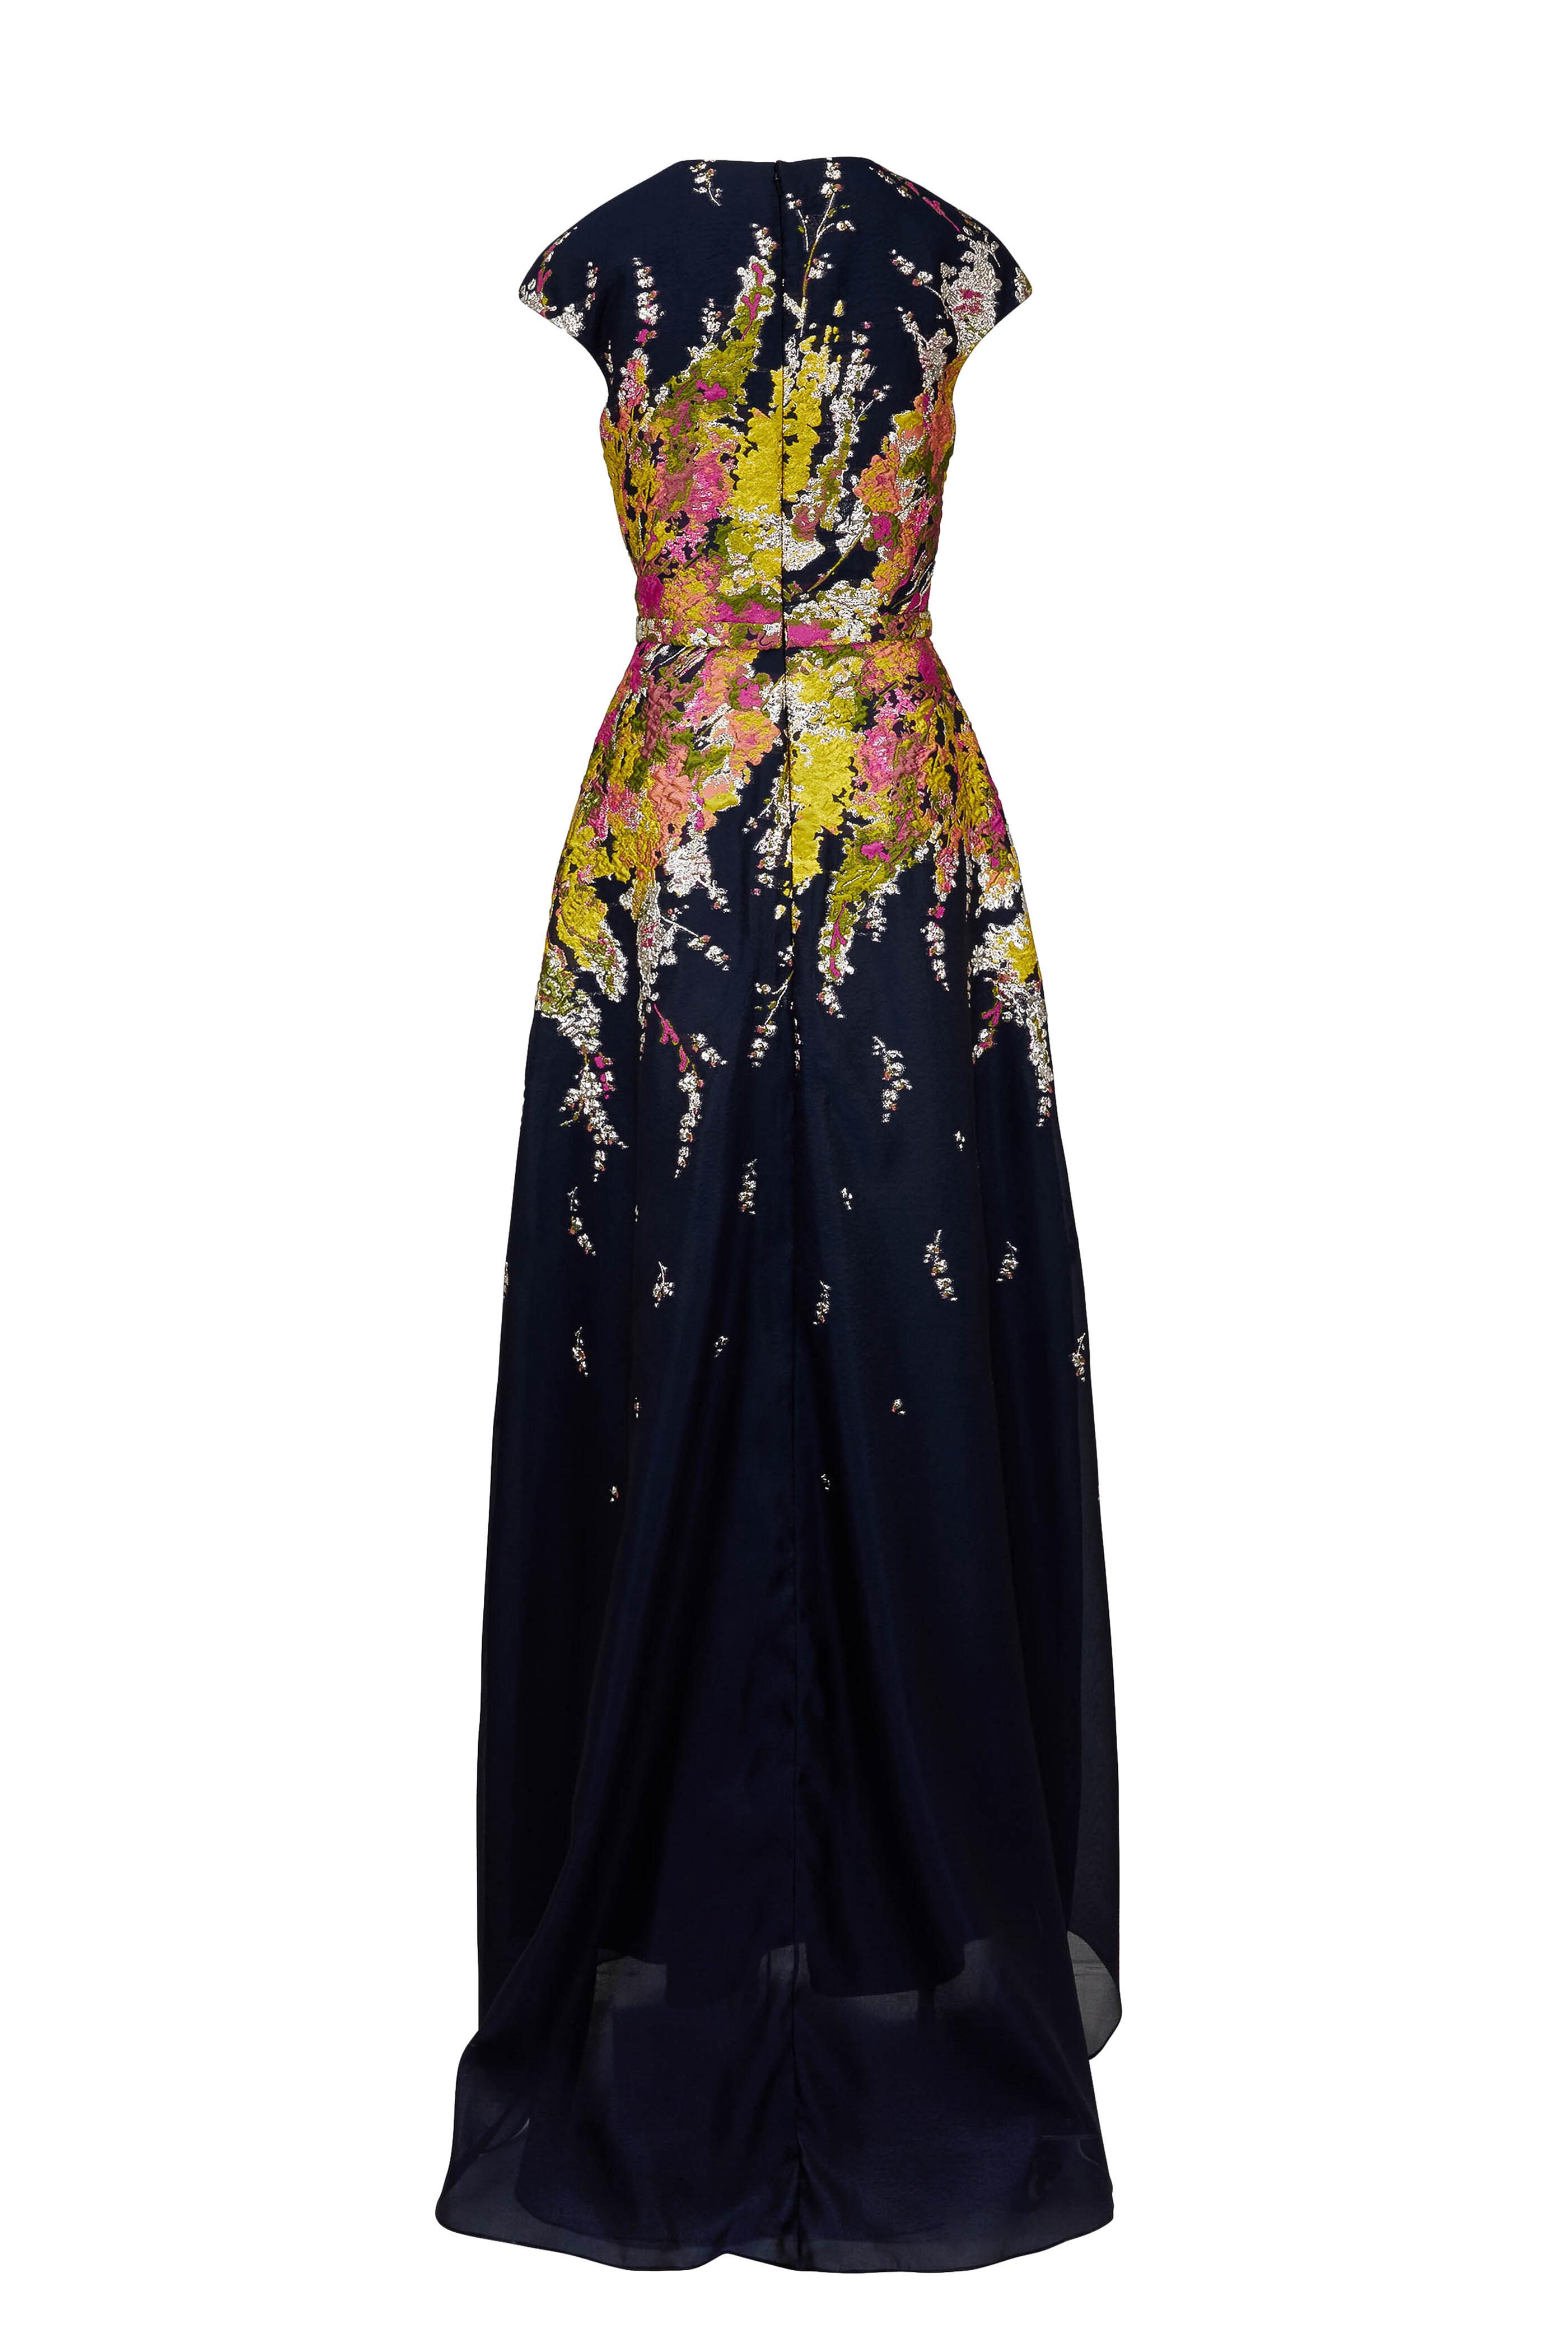 Pamella Roland - Navy Blue Floral Embroidered Cap Sleeve Gown